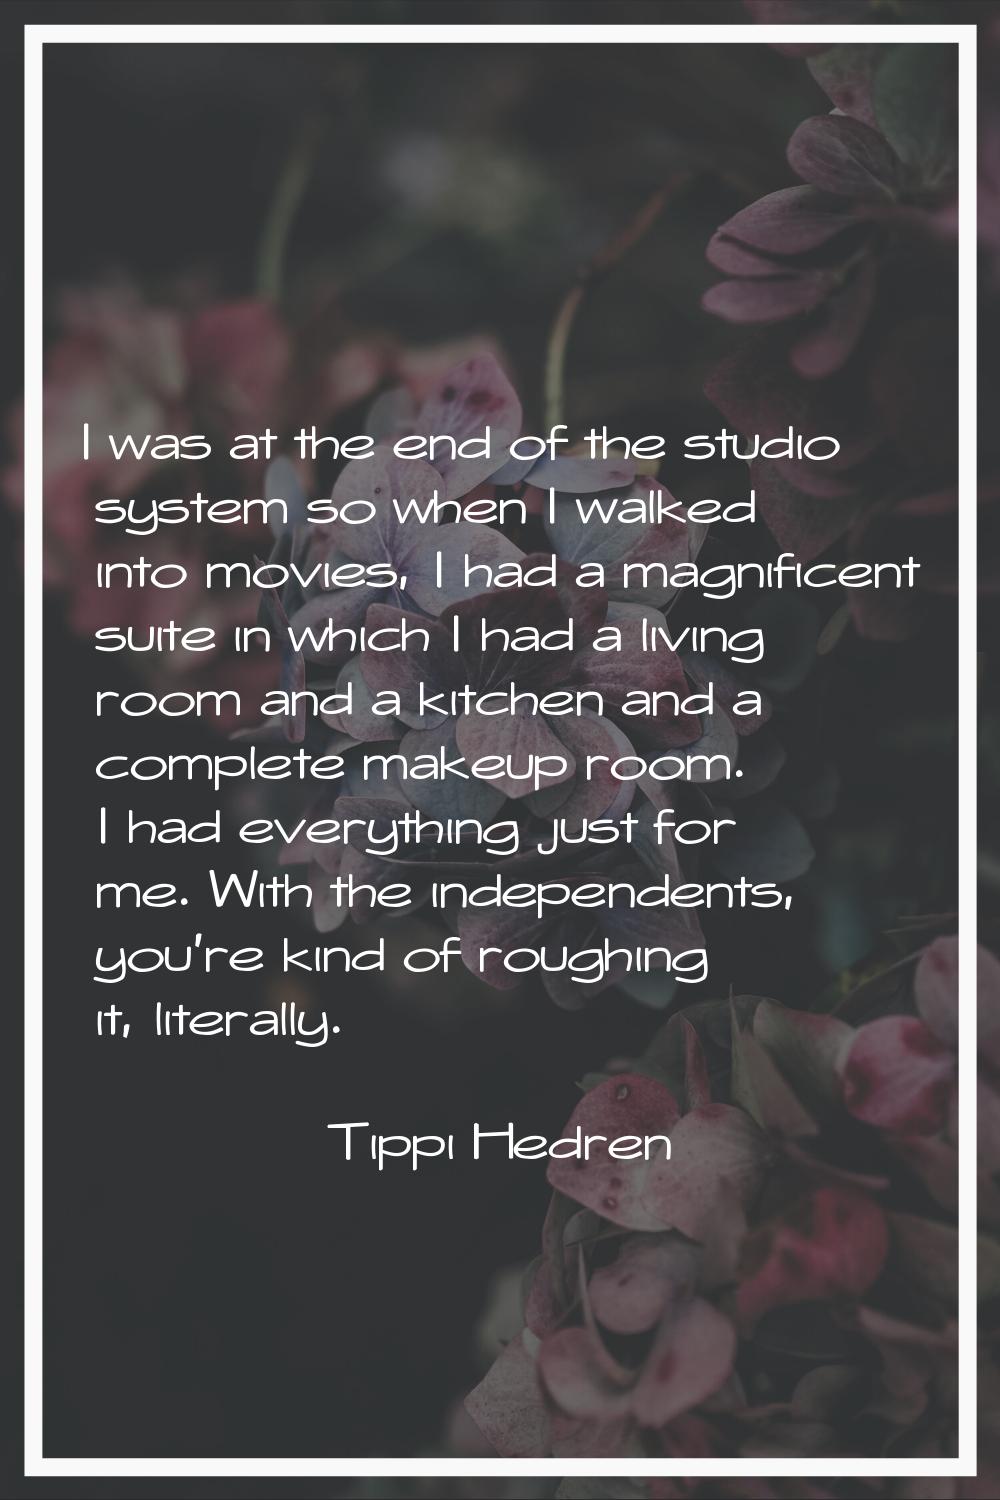 I was at the end of the studio system so when I walked into movies, I had a magnificent suite in wh